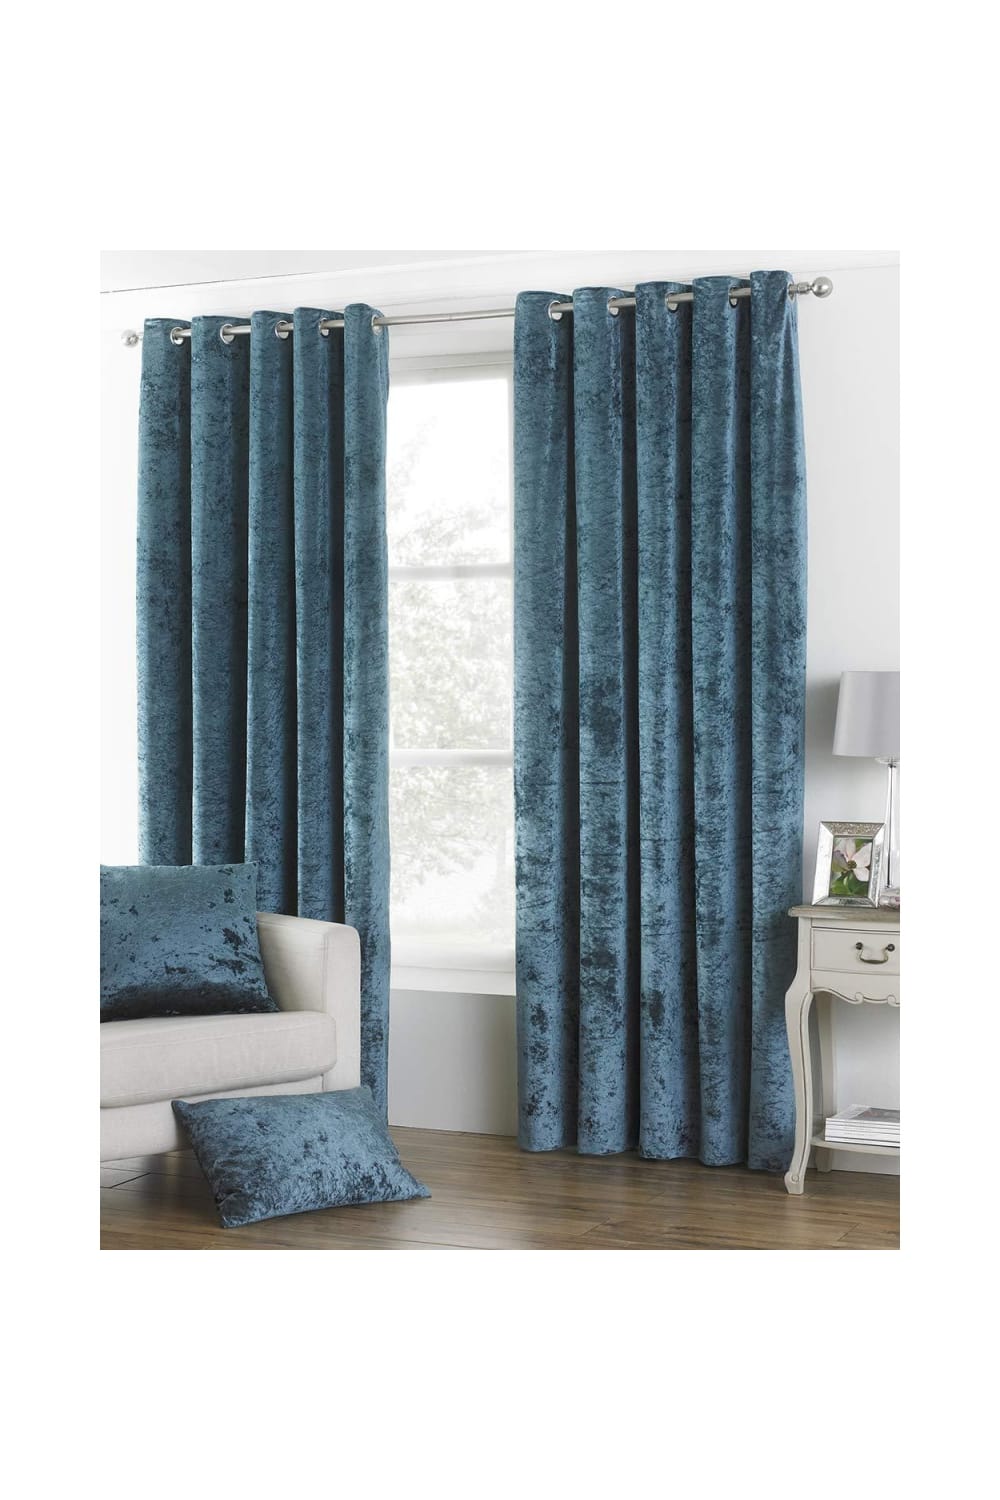 Riva Paoletti Verona Eyelet Curtains (Teal) (90 x 54in)